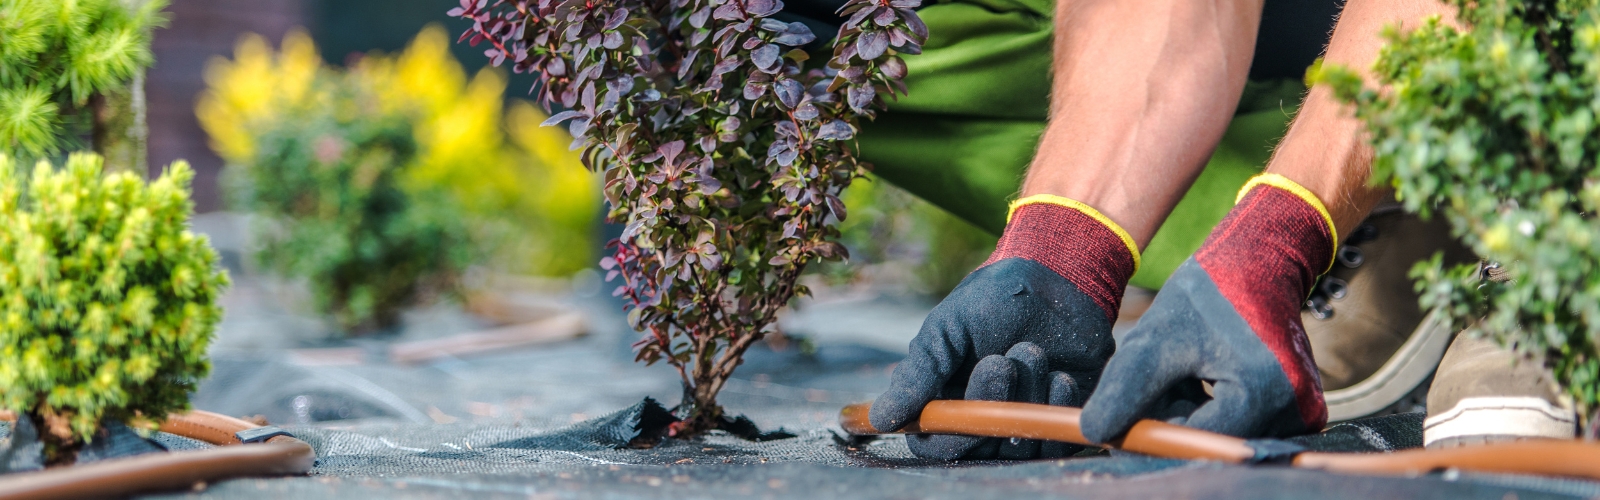 A person wearing gloves and green pants is working in a garden. They are adjusting an irrigation hose next to a small, purple-leaved shrub. The lush Prescott garden features various greenery and yellow flowering plants.